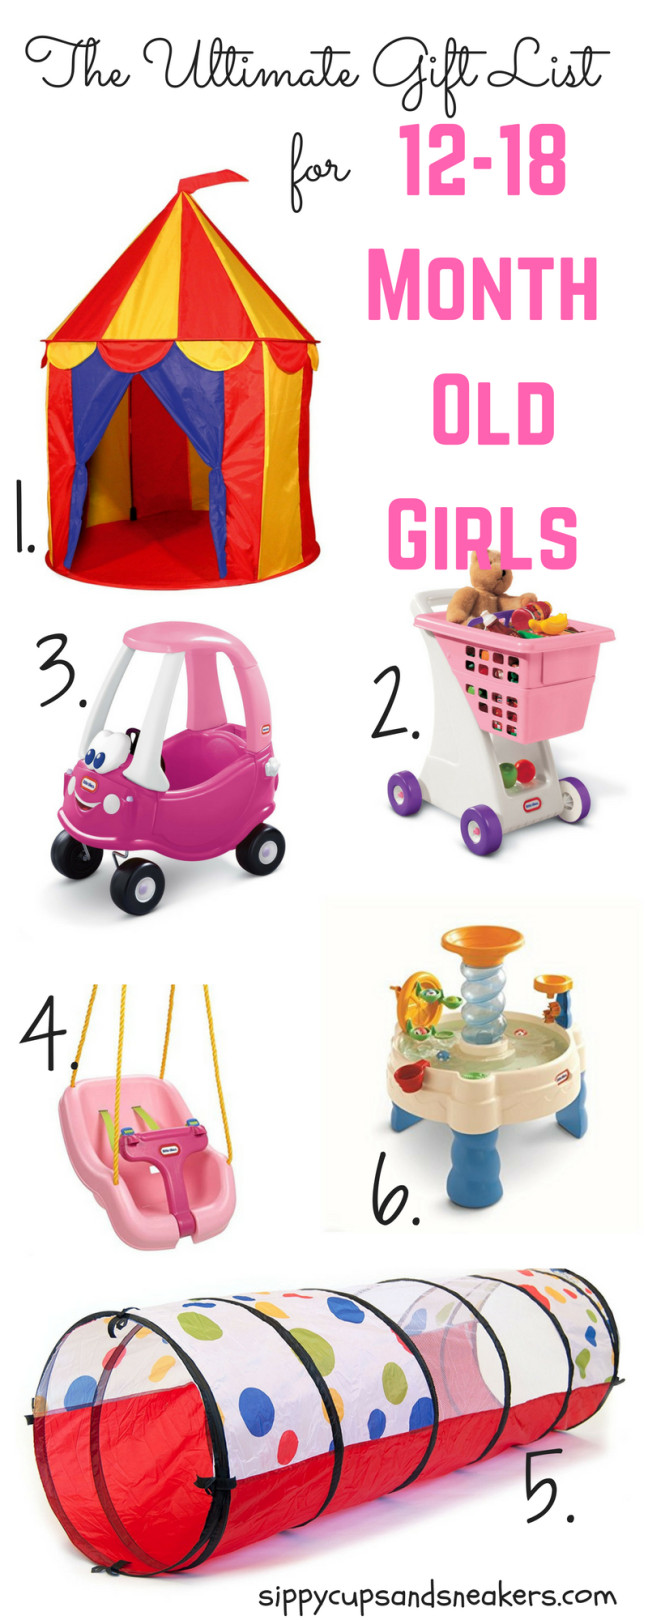 18 Month Old Christmas Gift Ideas
 The Ultimate Gift List for 12 18 Month Old Girls